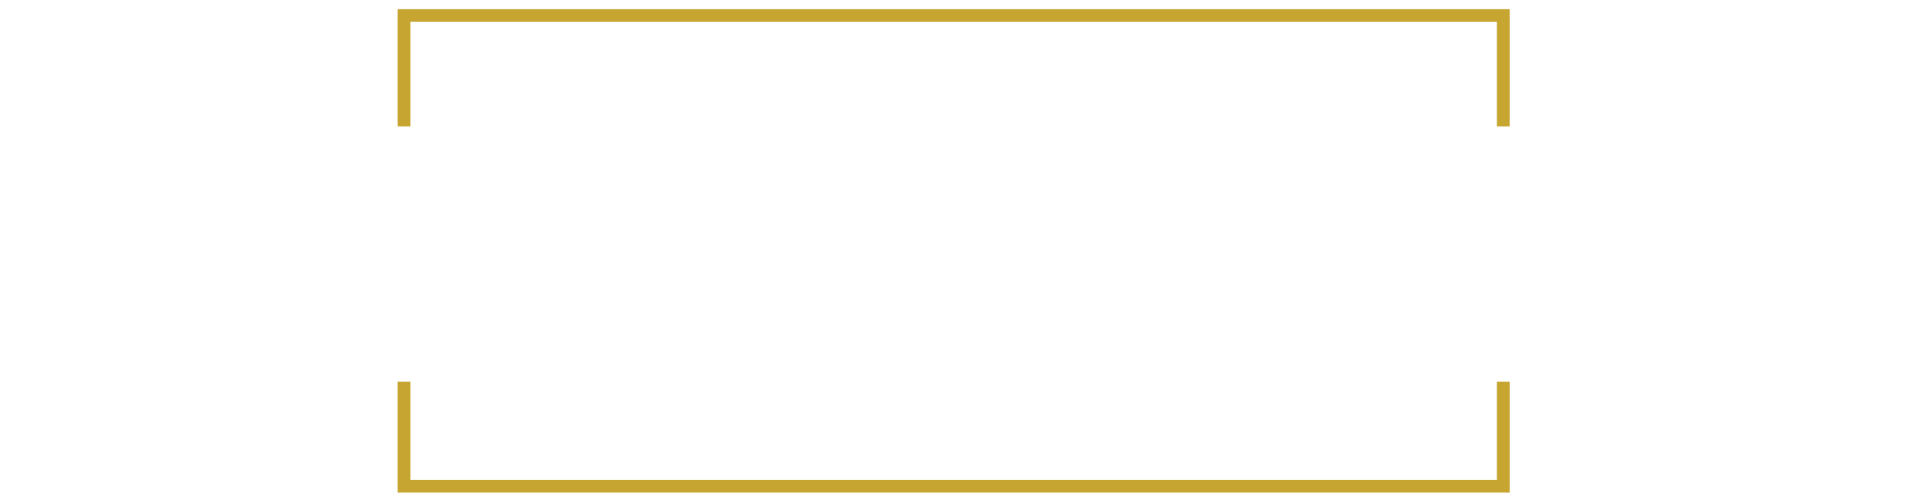 Romines Weis & Young Law Firm in Louisville ky